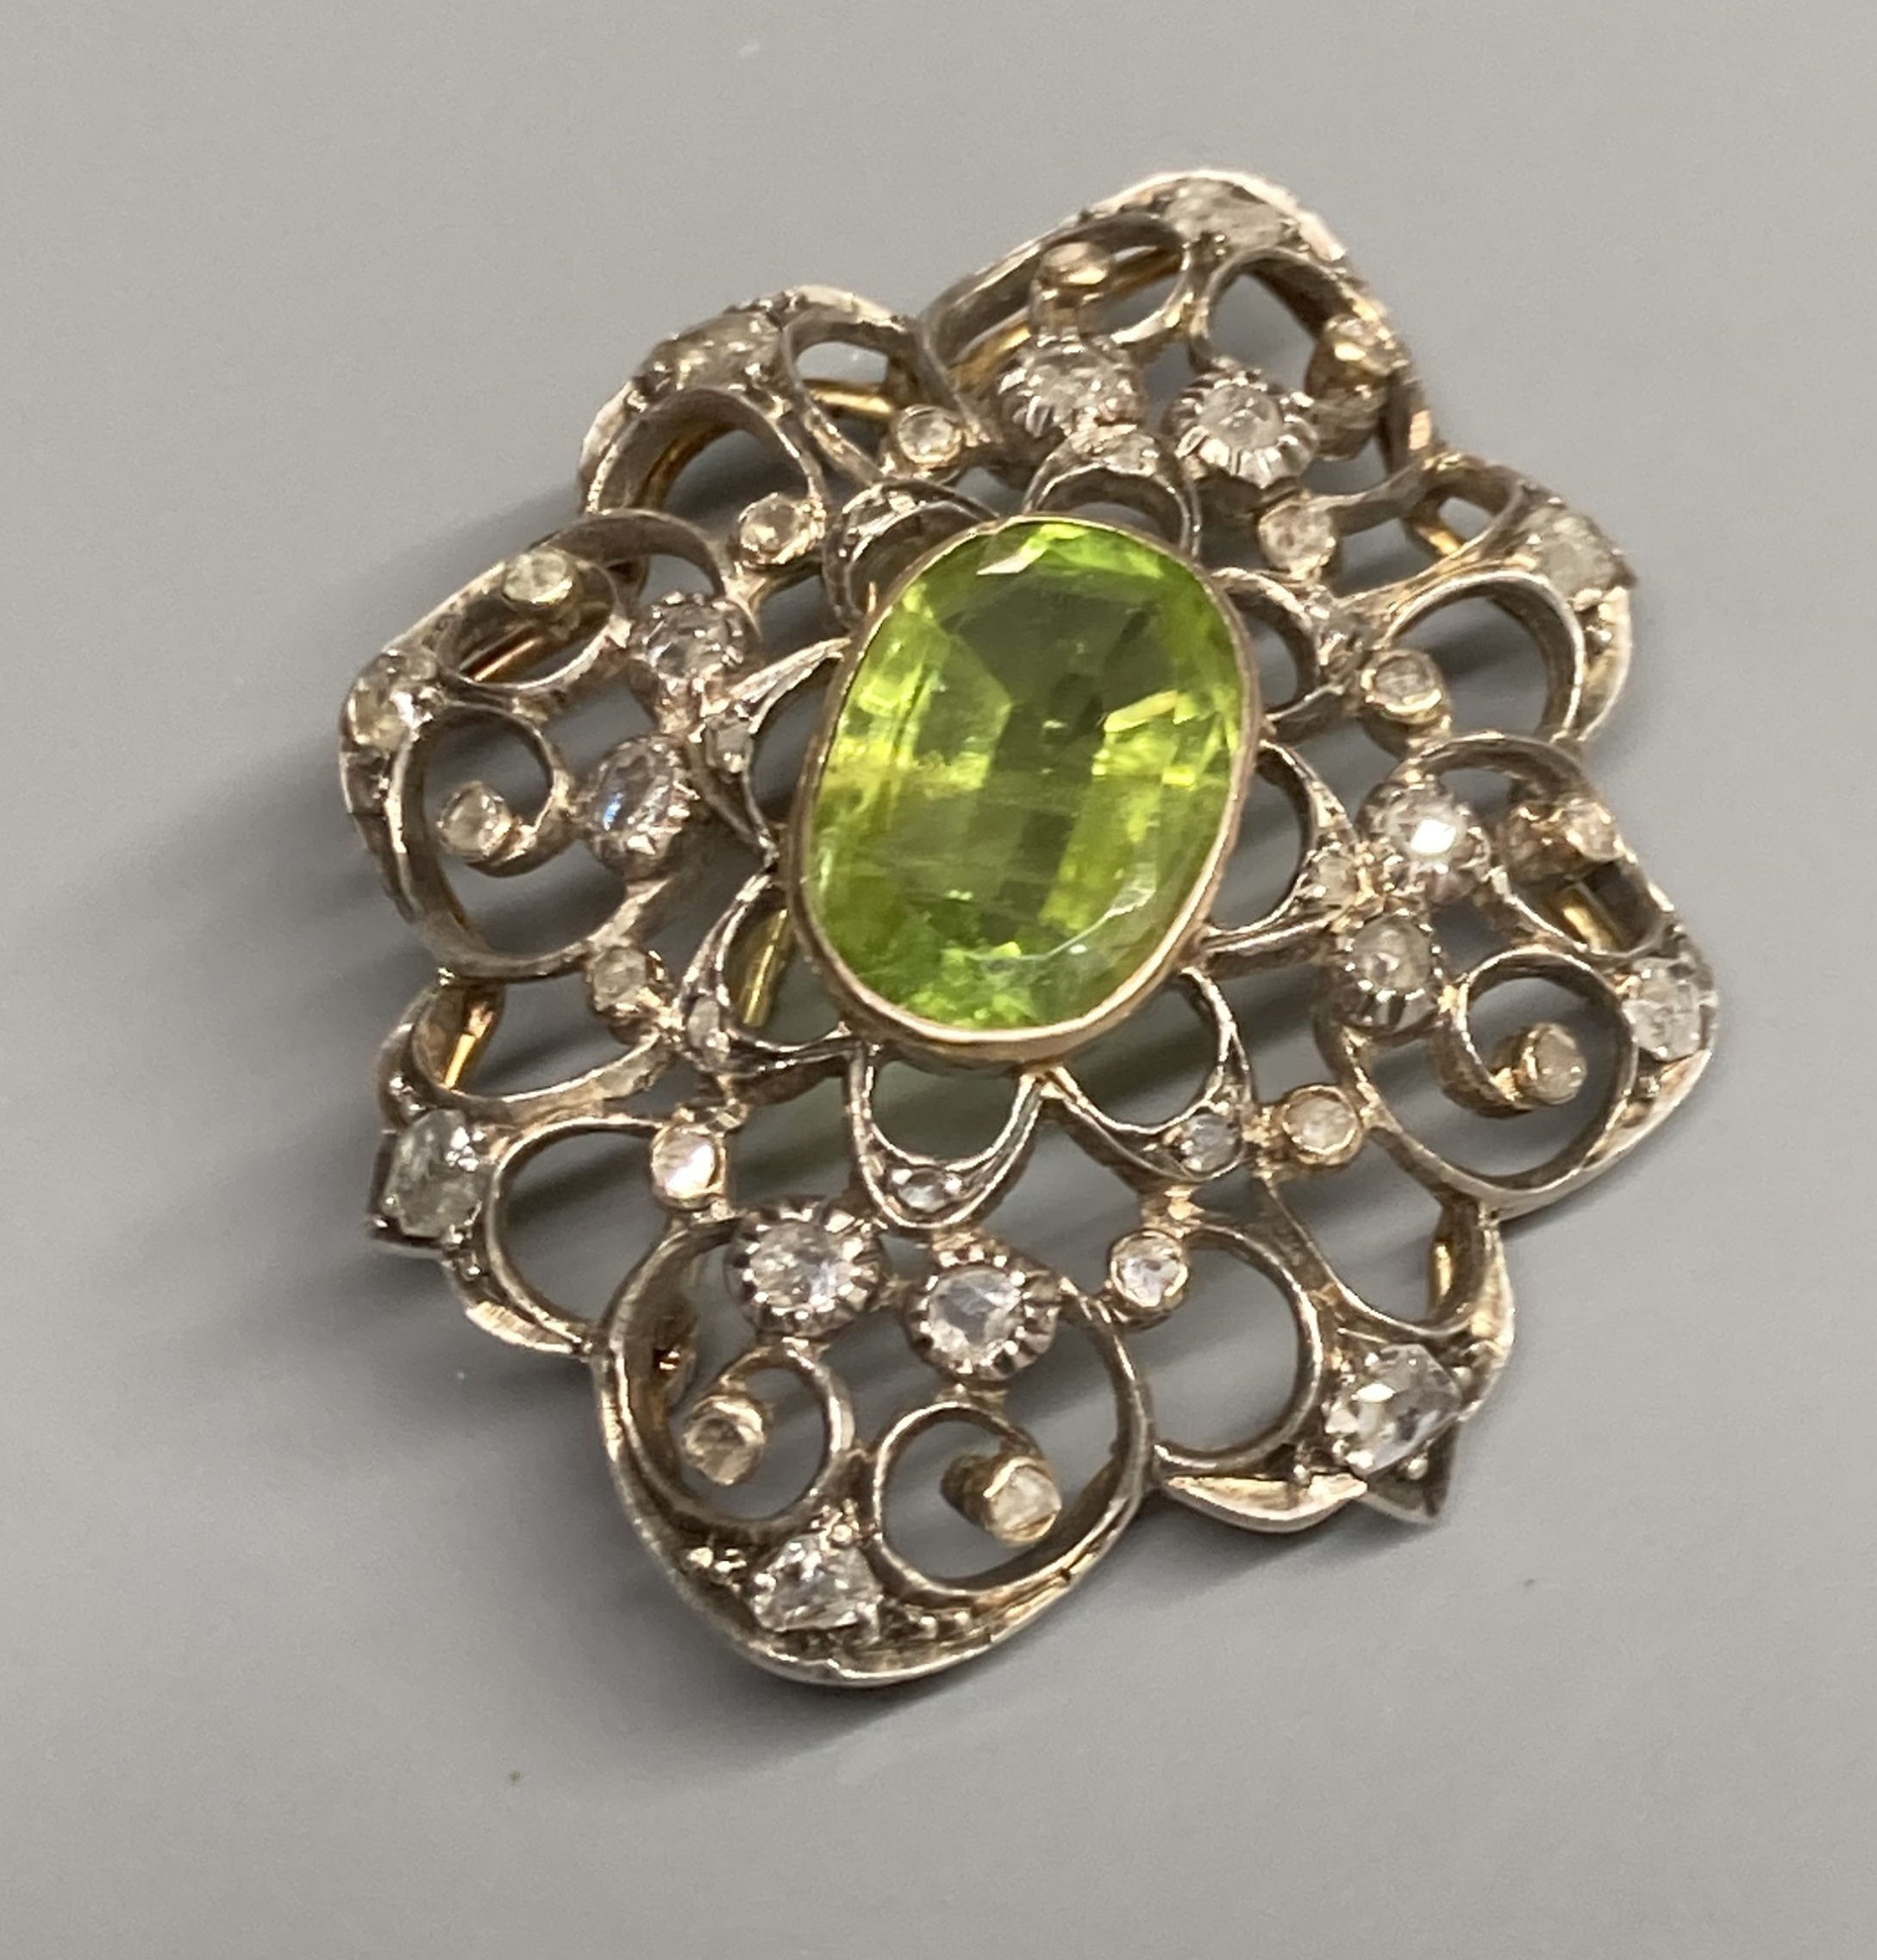 An early to mid 20th century Austro-Hungarian? white and yellow metal peridot and diamond set brooch, 38mm, gross 9 grams.